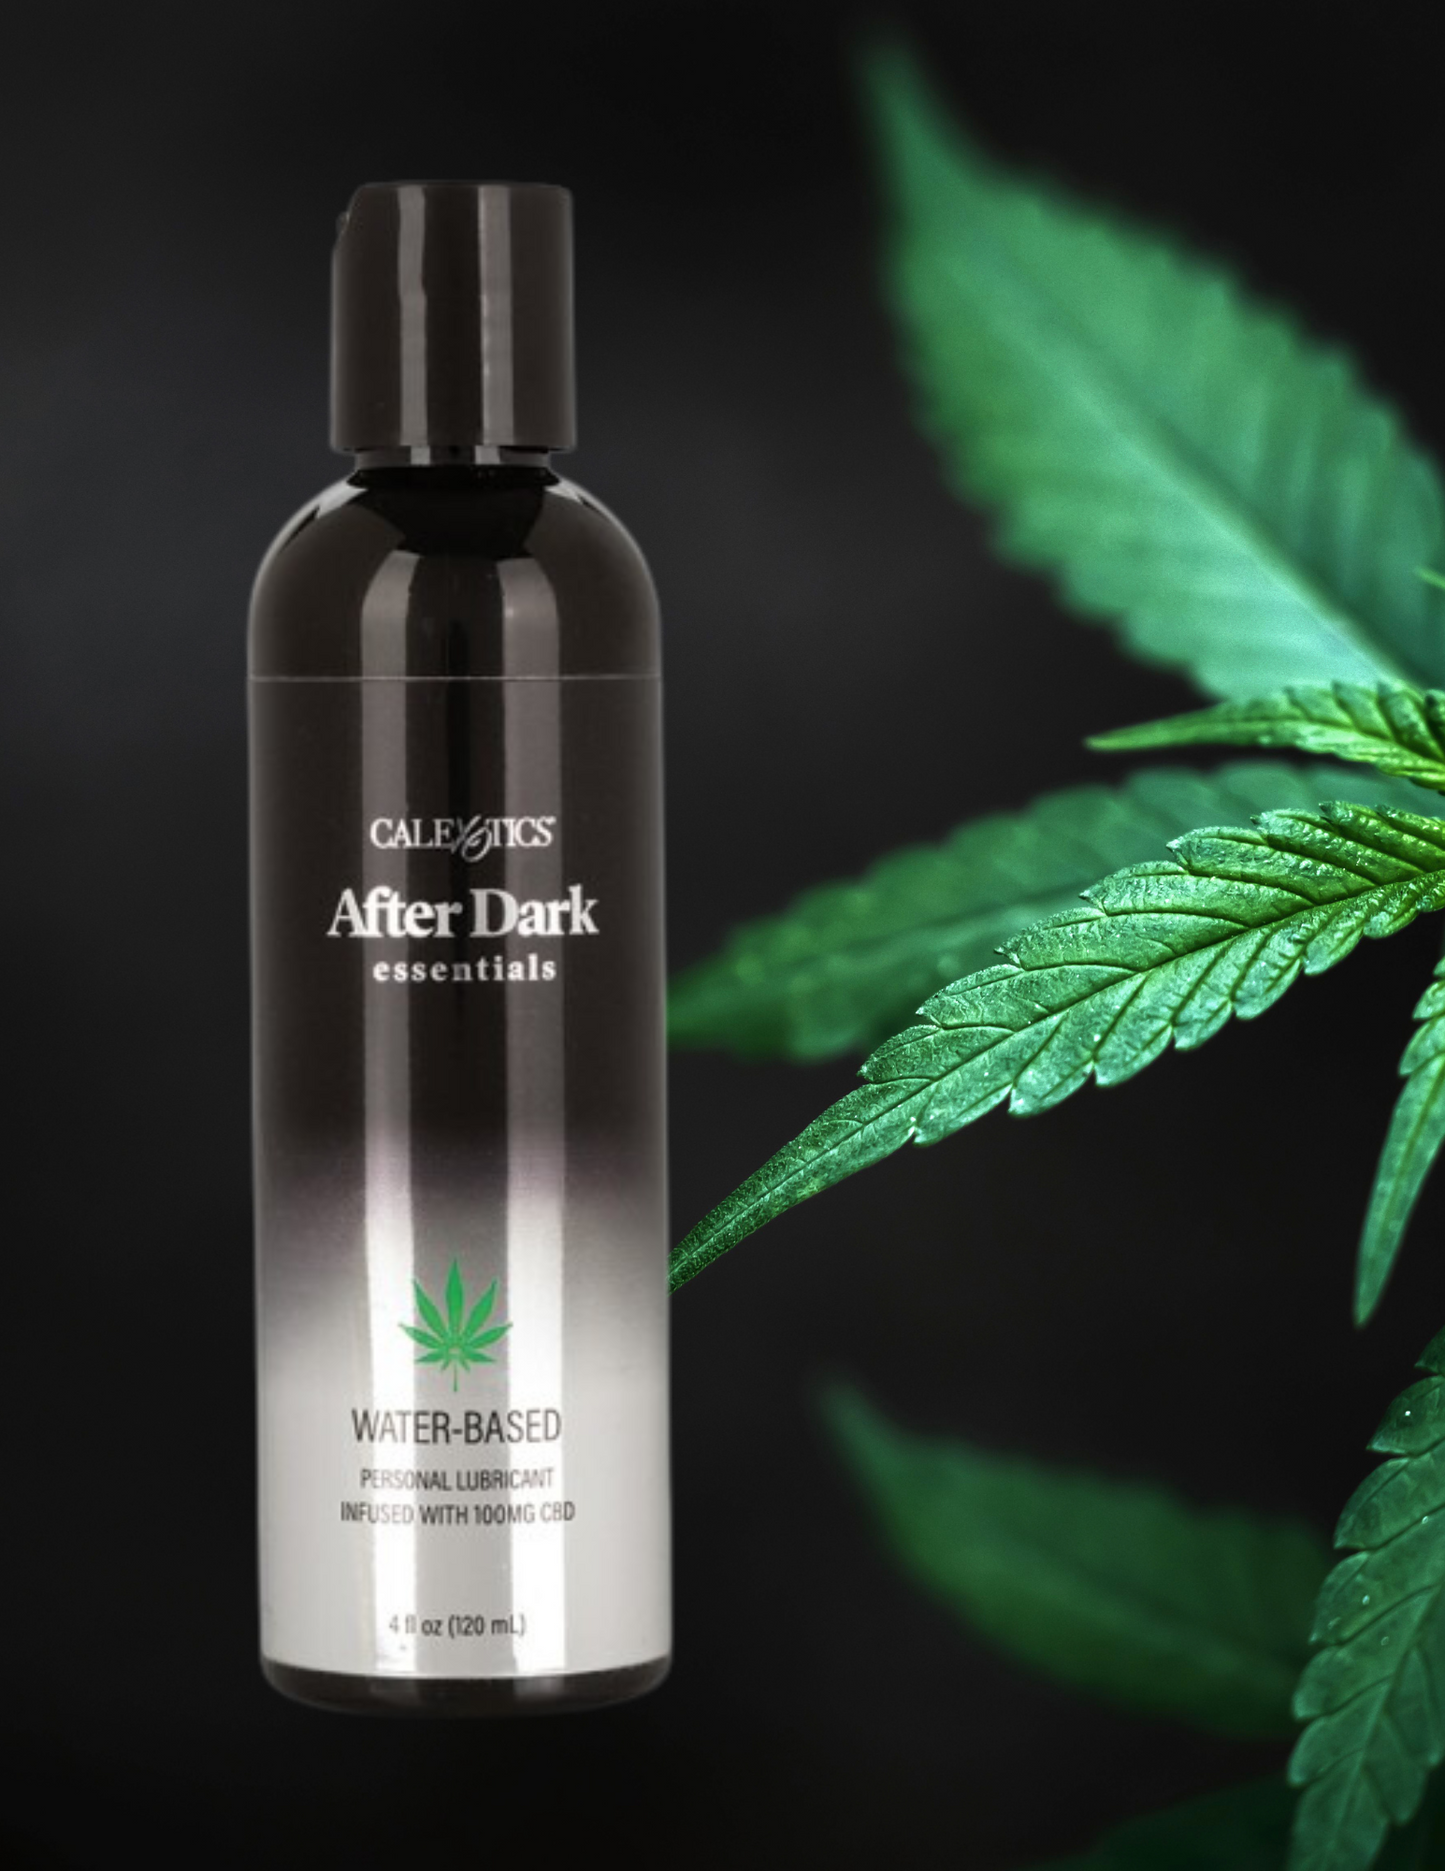 CalExotics After Dark Water Based CBD Personal Lubricant 2oz.